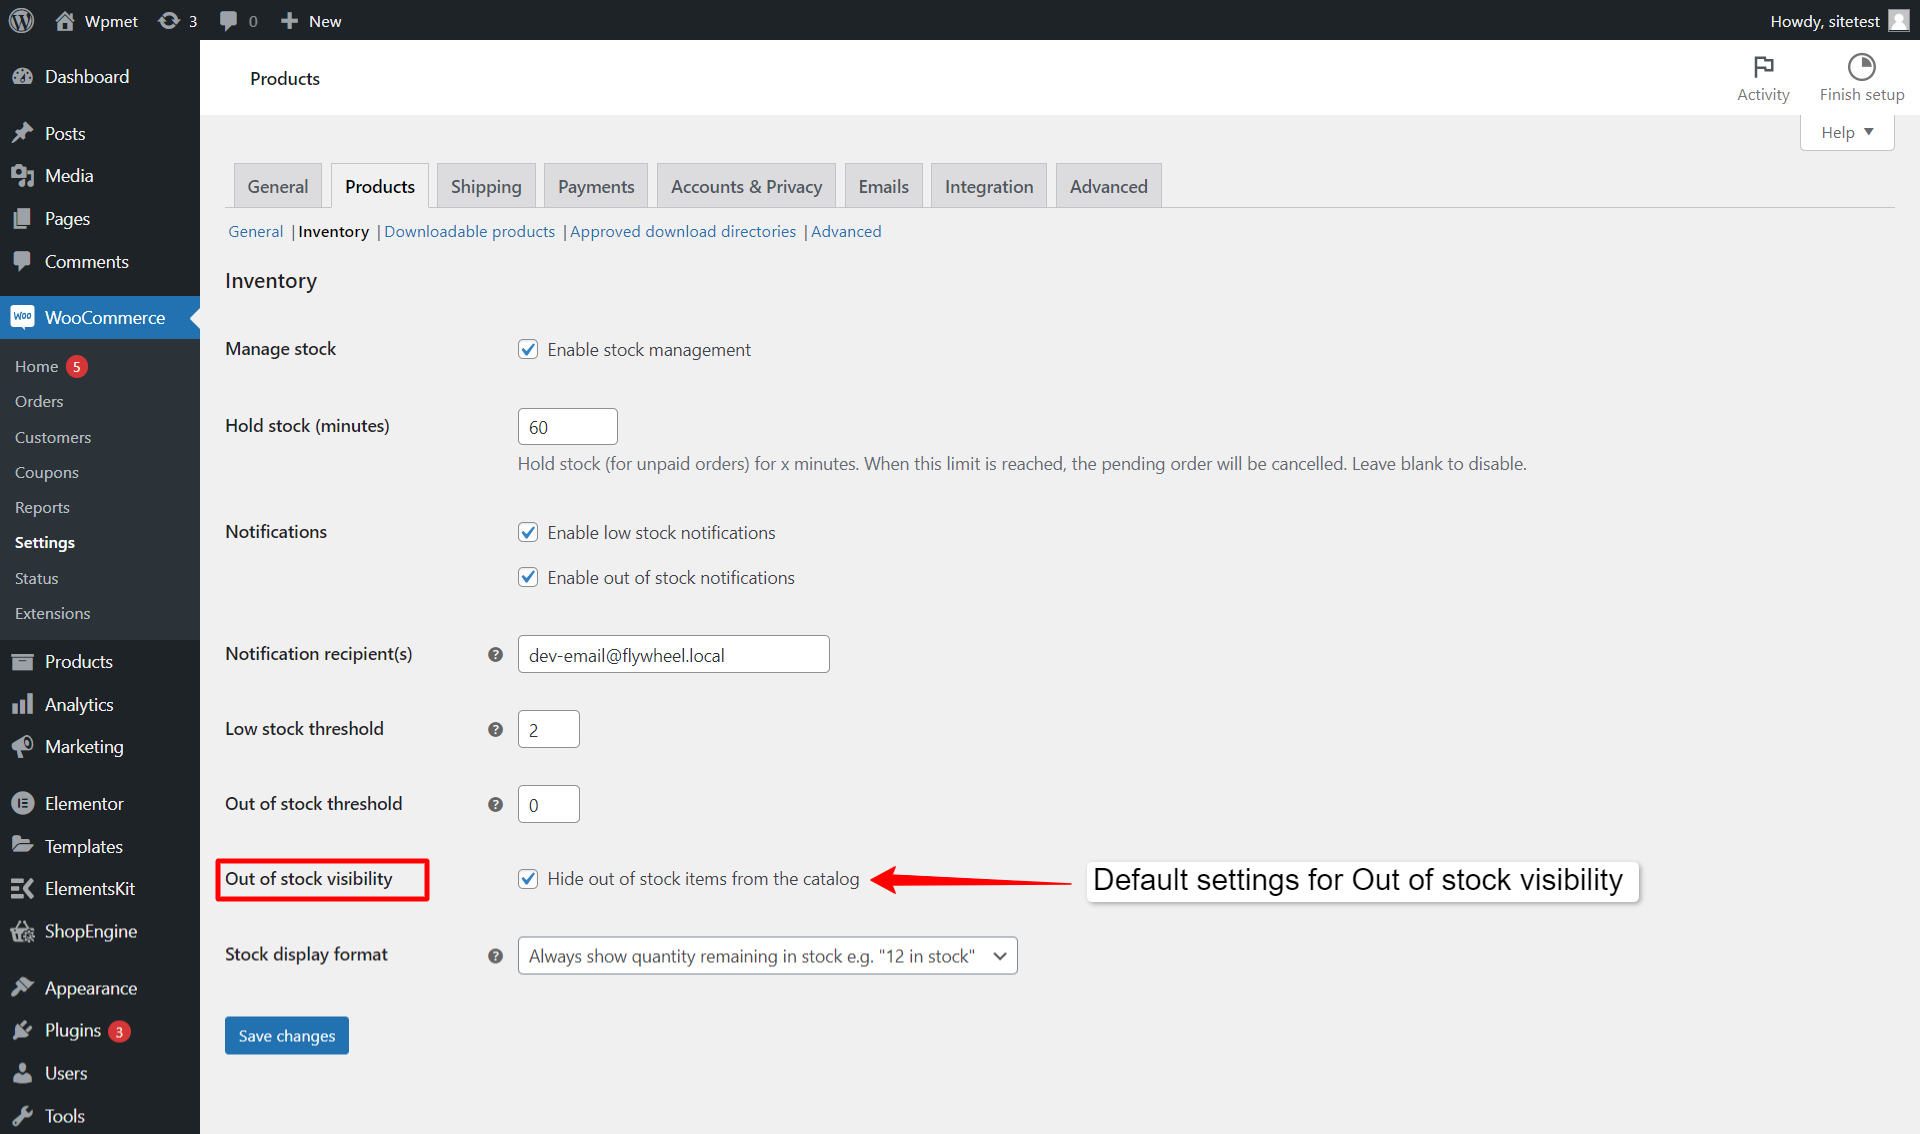 An image showing Default Out of Stock Visibility settings for WooCommerce